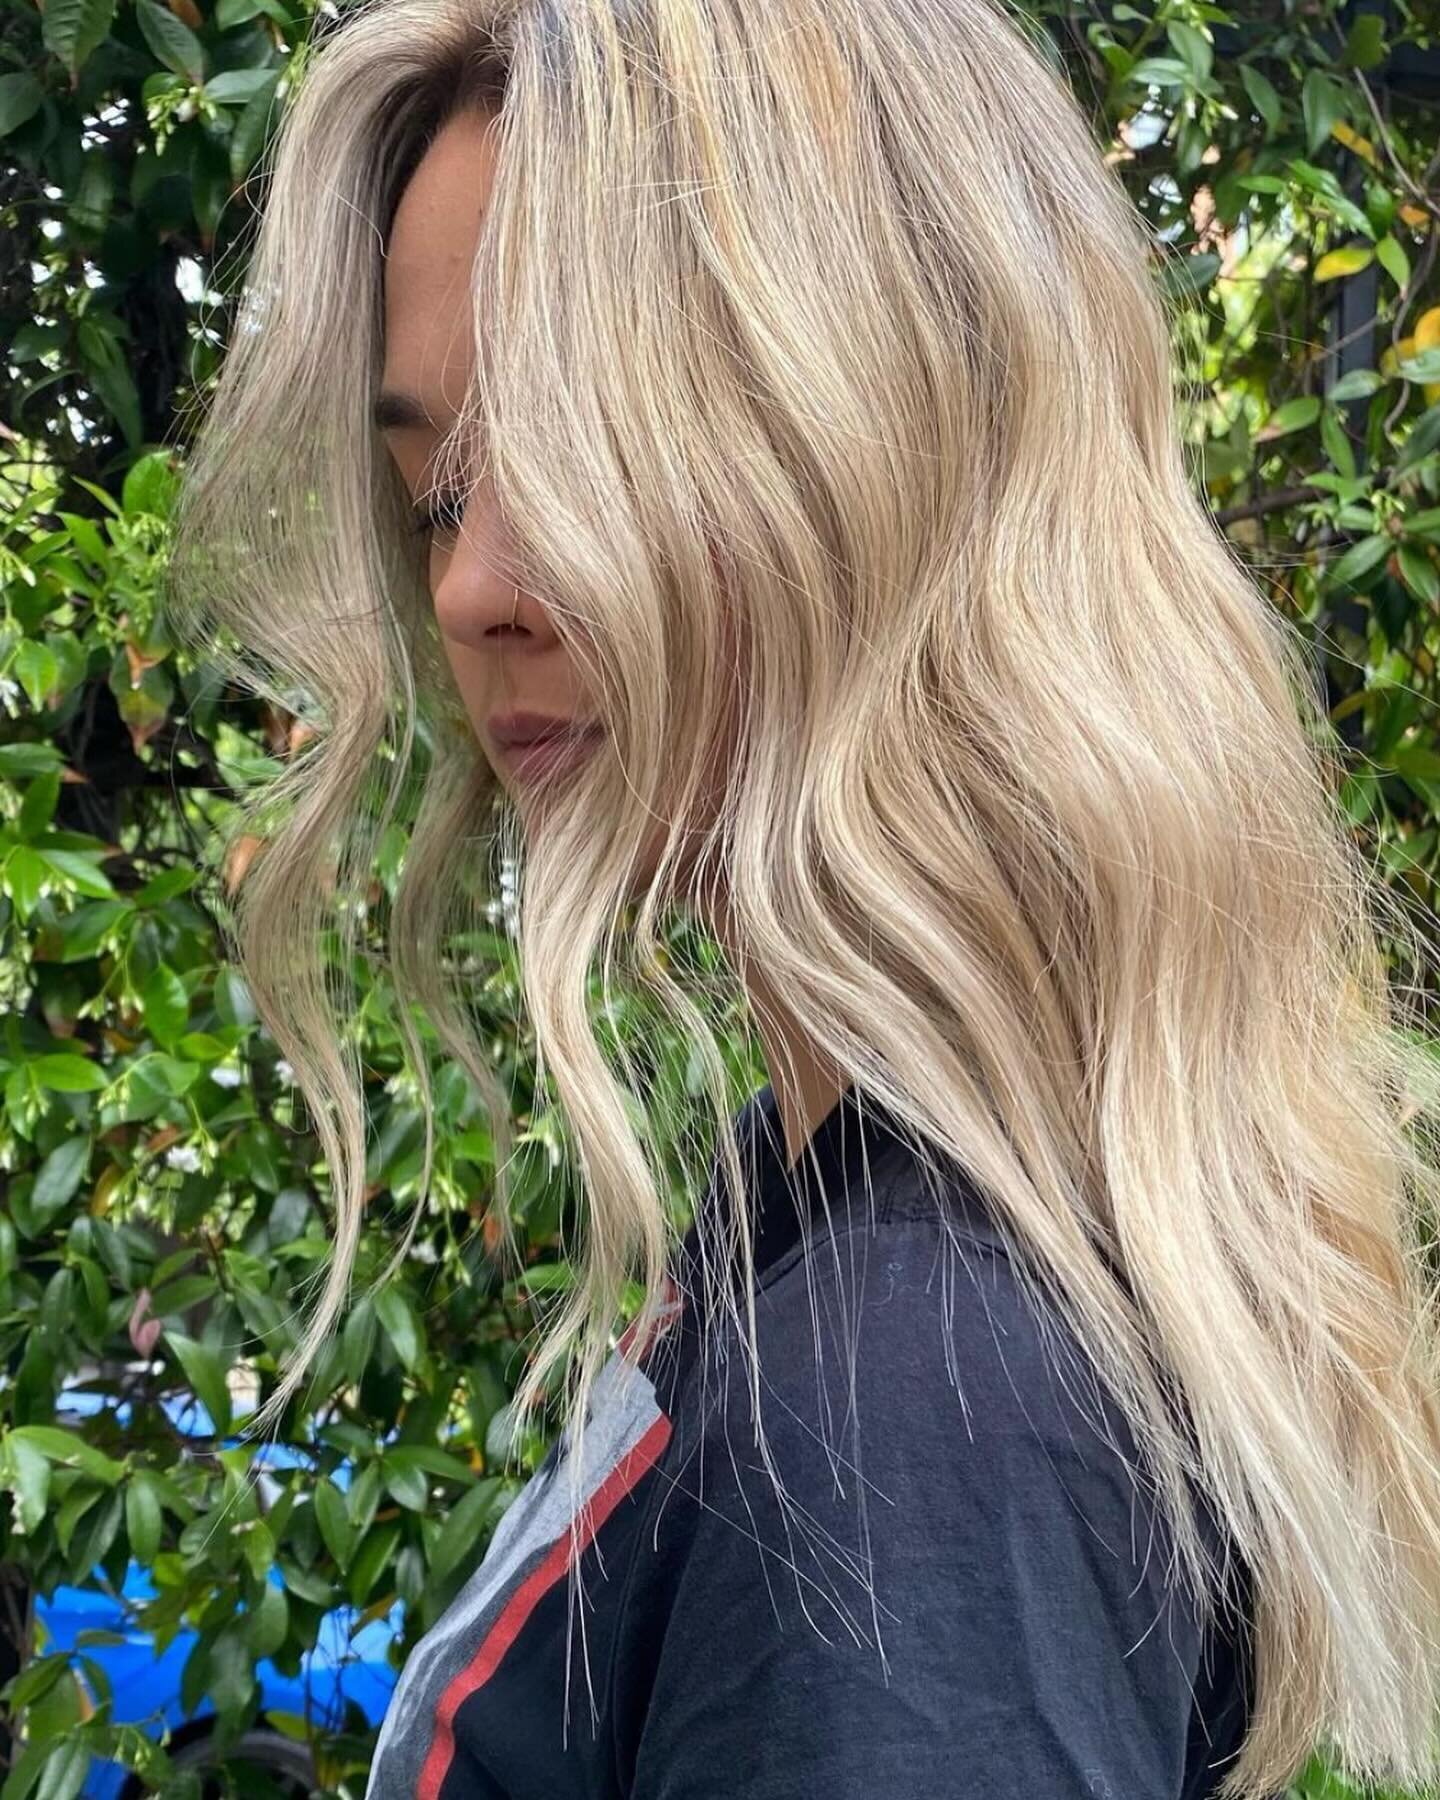 Stylist Liv @hippiehairross is the artist behind this beautiful blonde 🤍

She has openings this month behind the chair at our Pearl location. Schedule online or by calling the salon:

503-223-7331
www.vagaro.com/77salon

#77salonhillsdale #77salon #